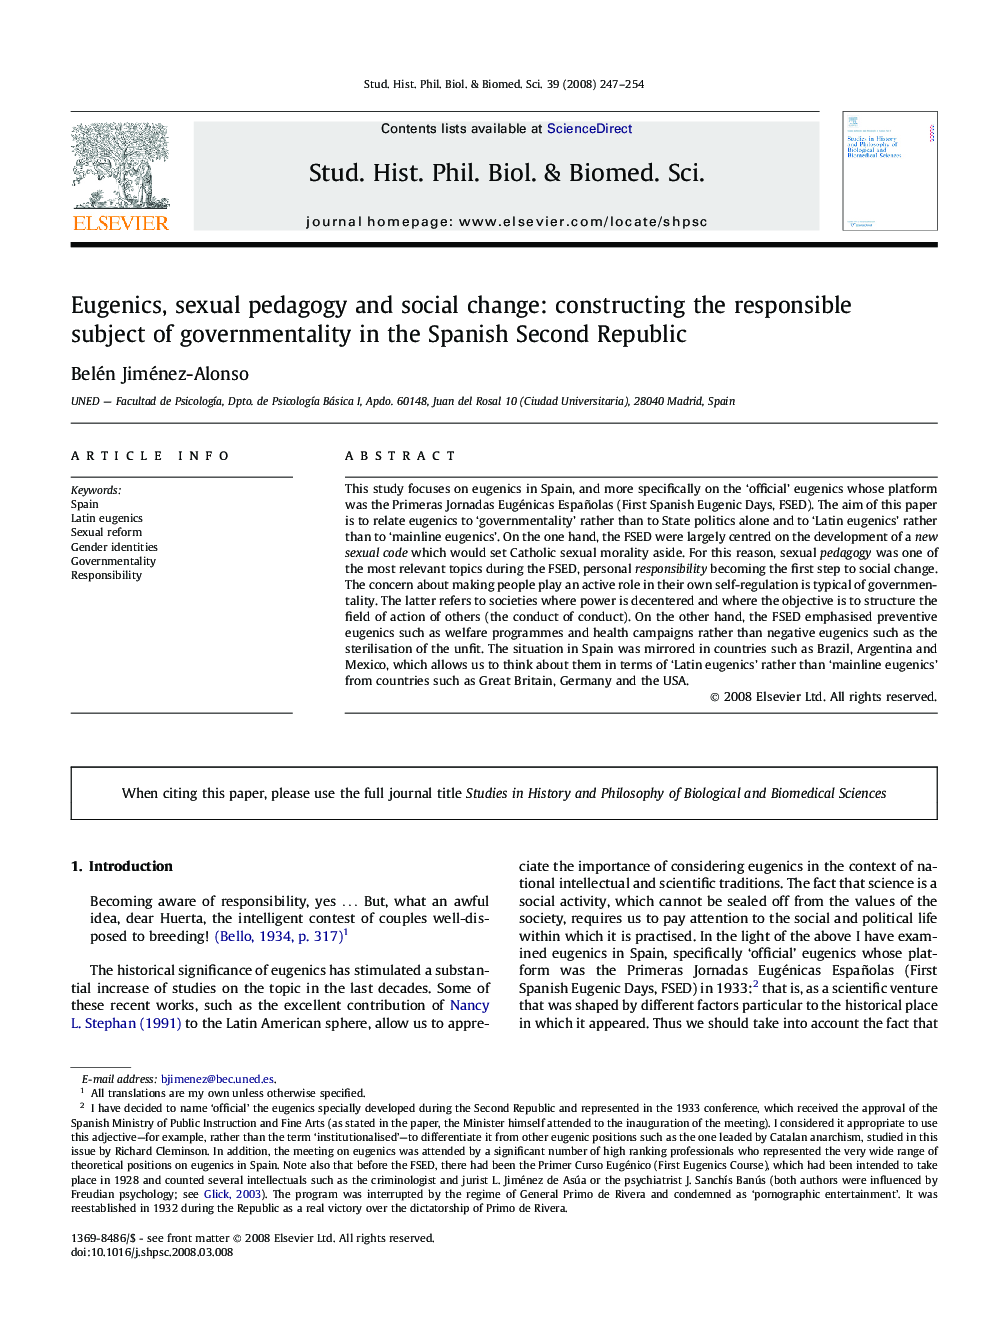 Eugenics, sexual pedagogy and social change: constructing the responsible subject of governmentality in the Spanish Second Republic